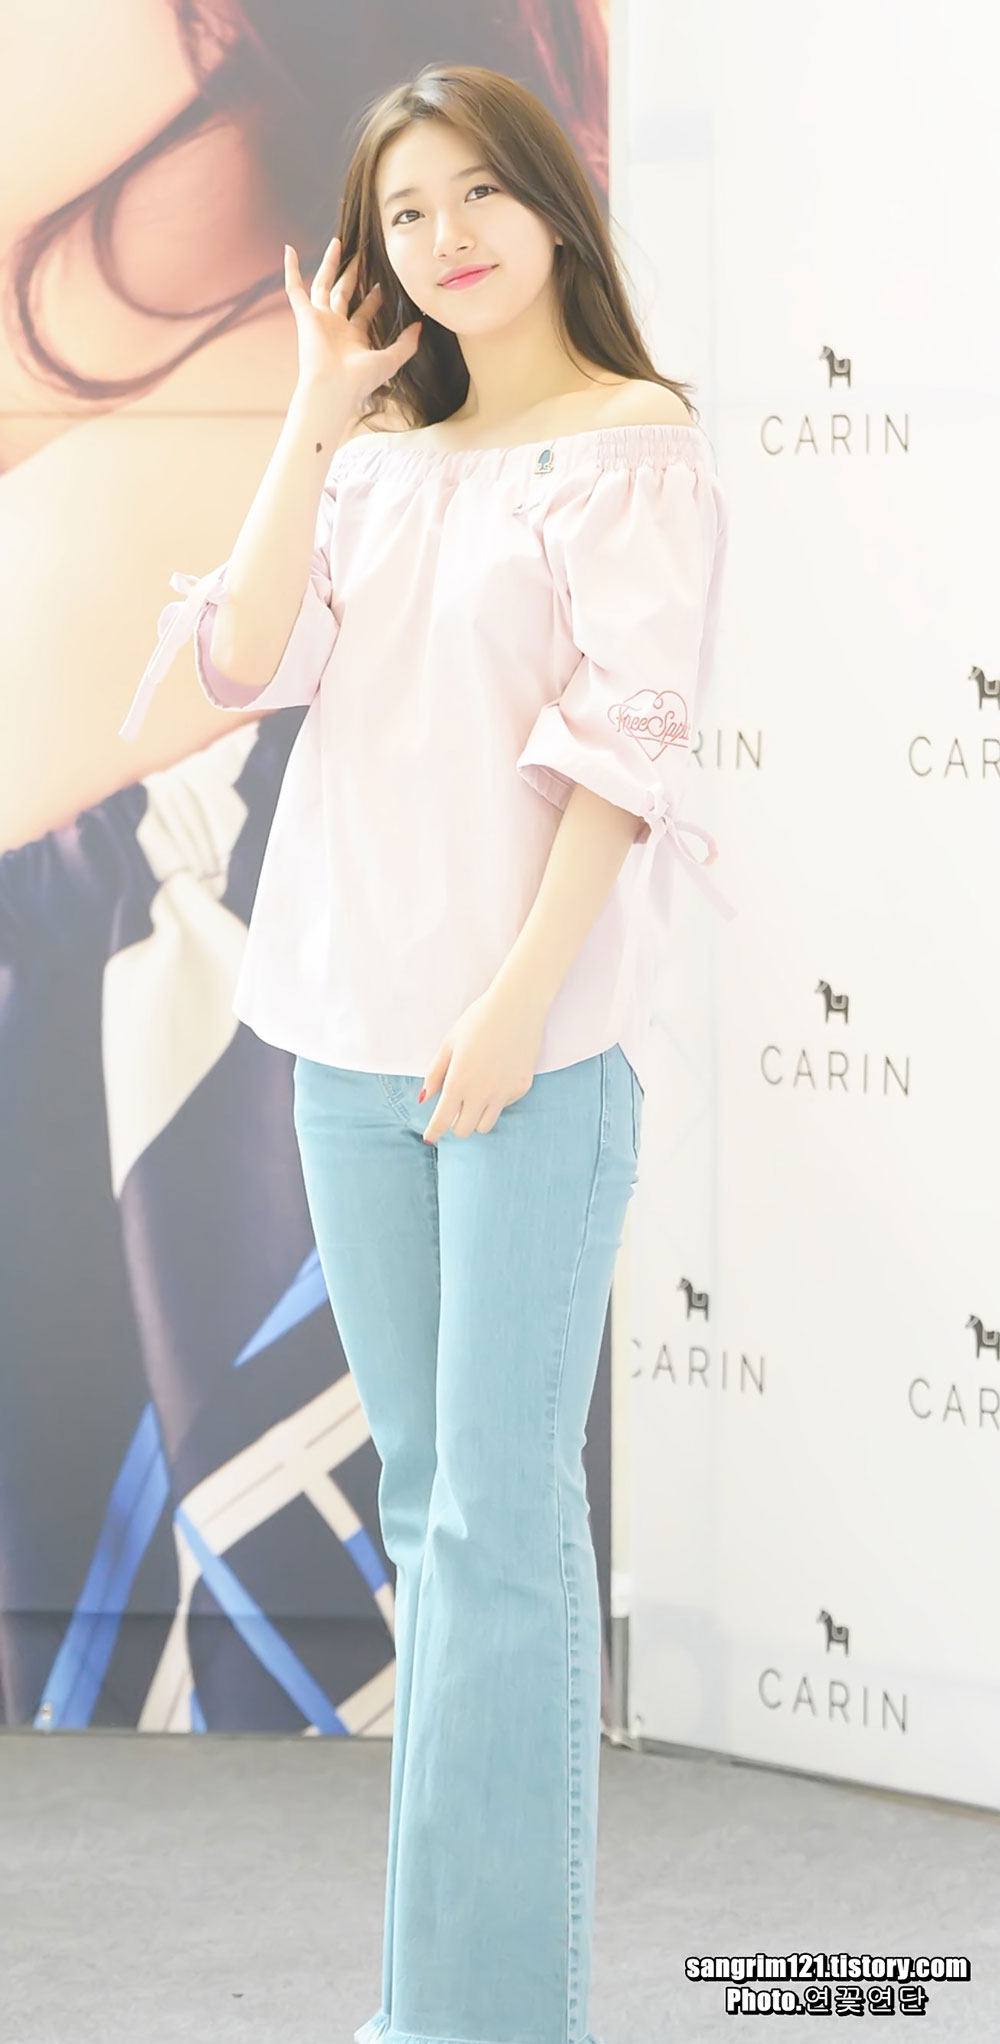 Bae Suzy Carin fan signing event